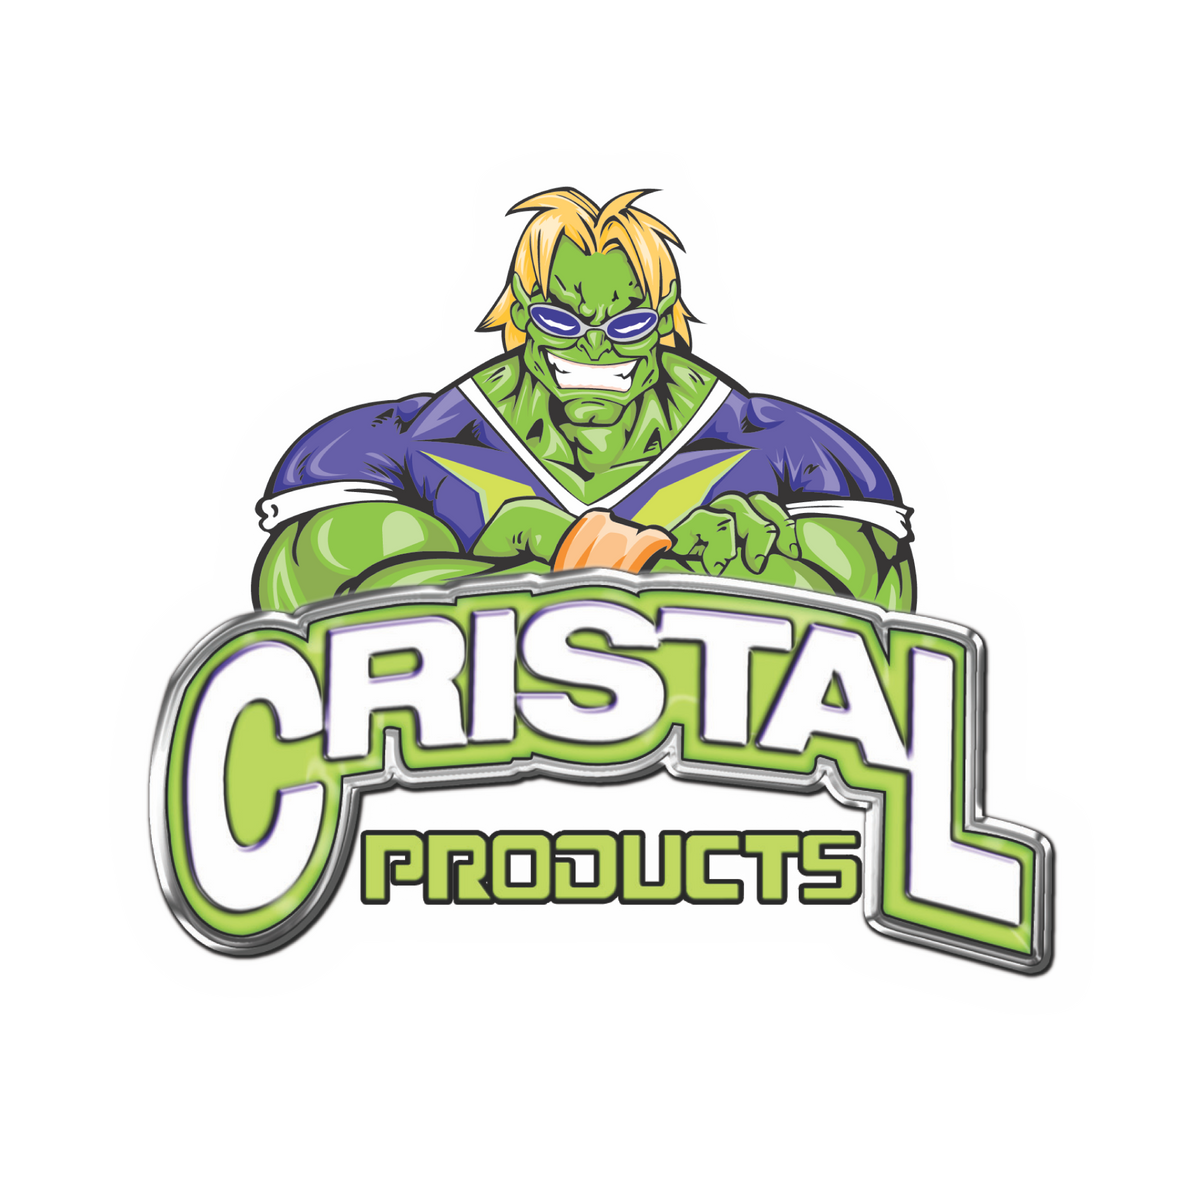 CRISTAL PRODUCT